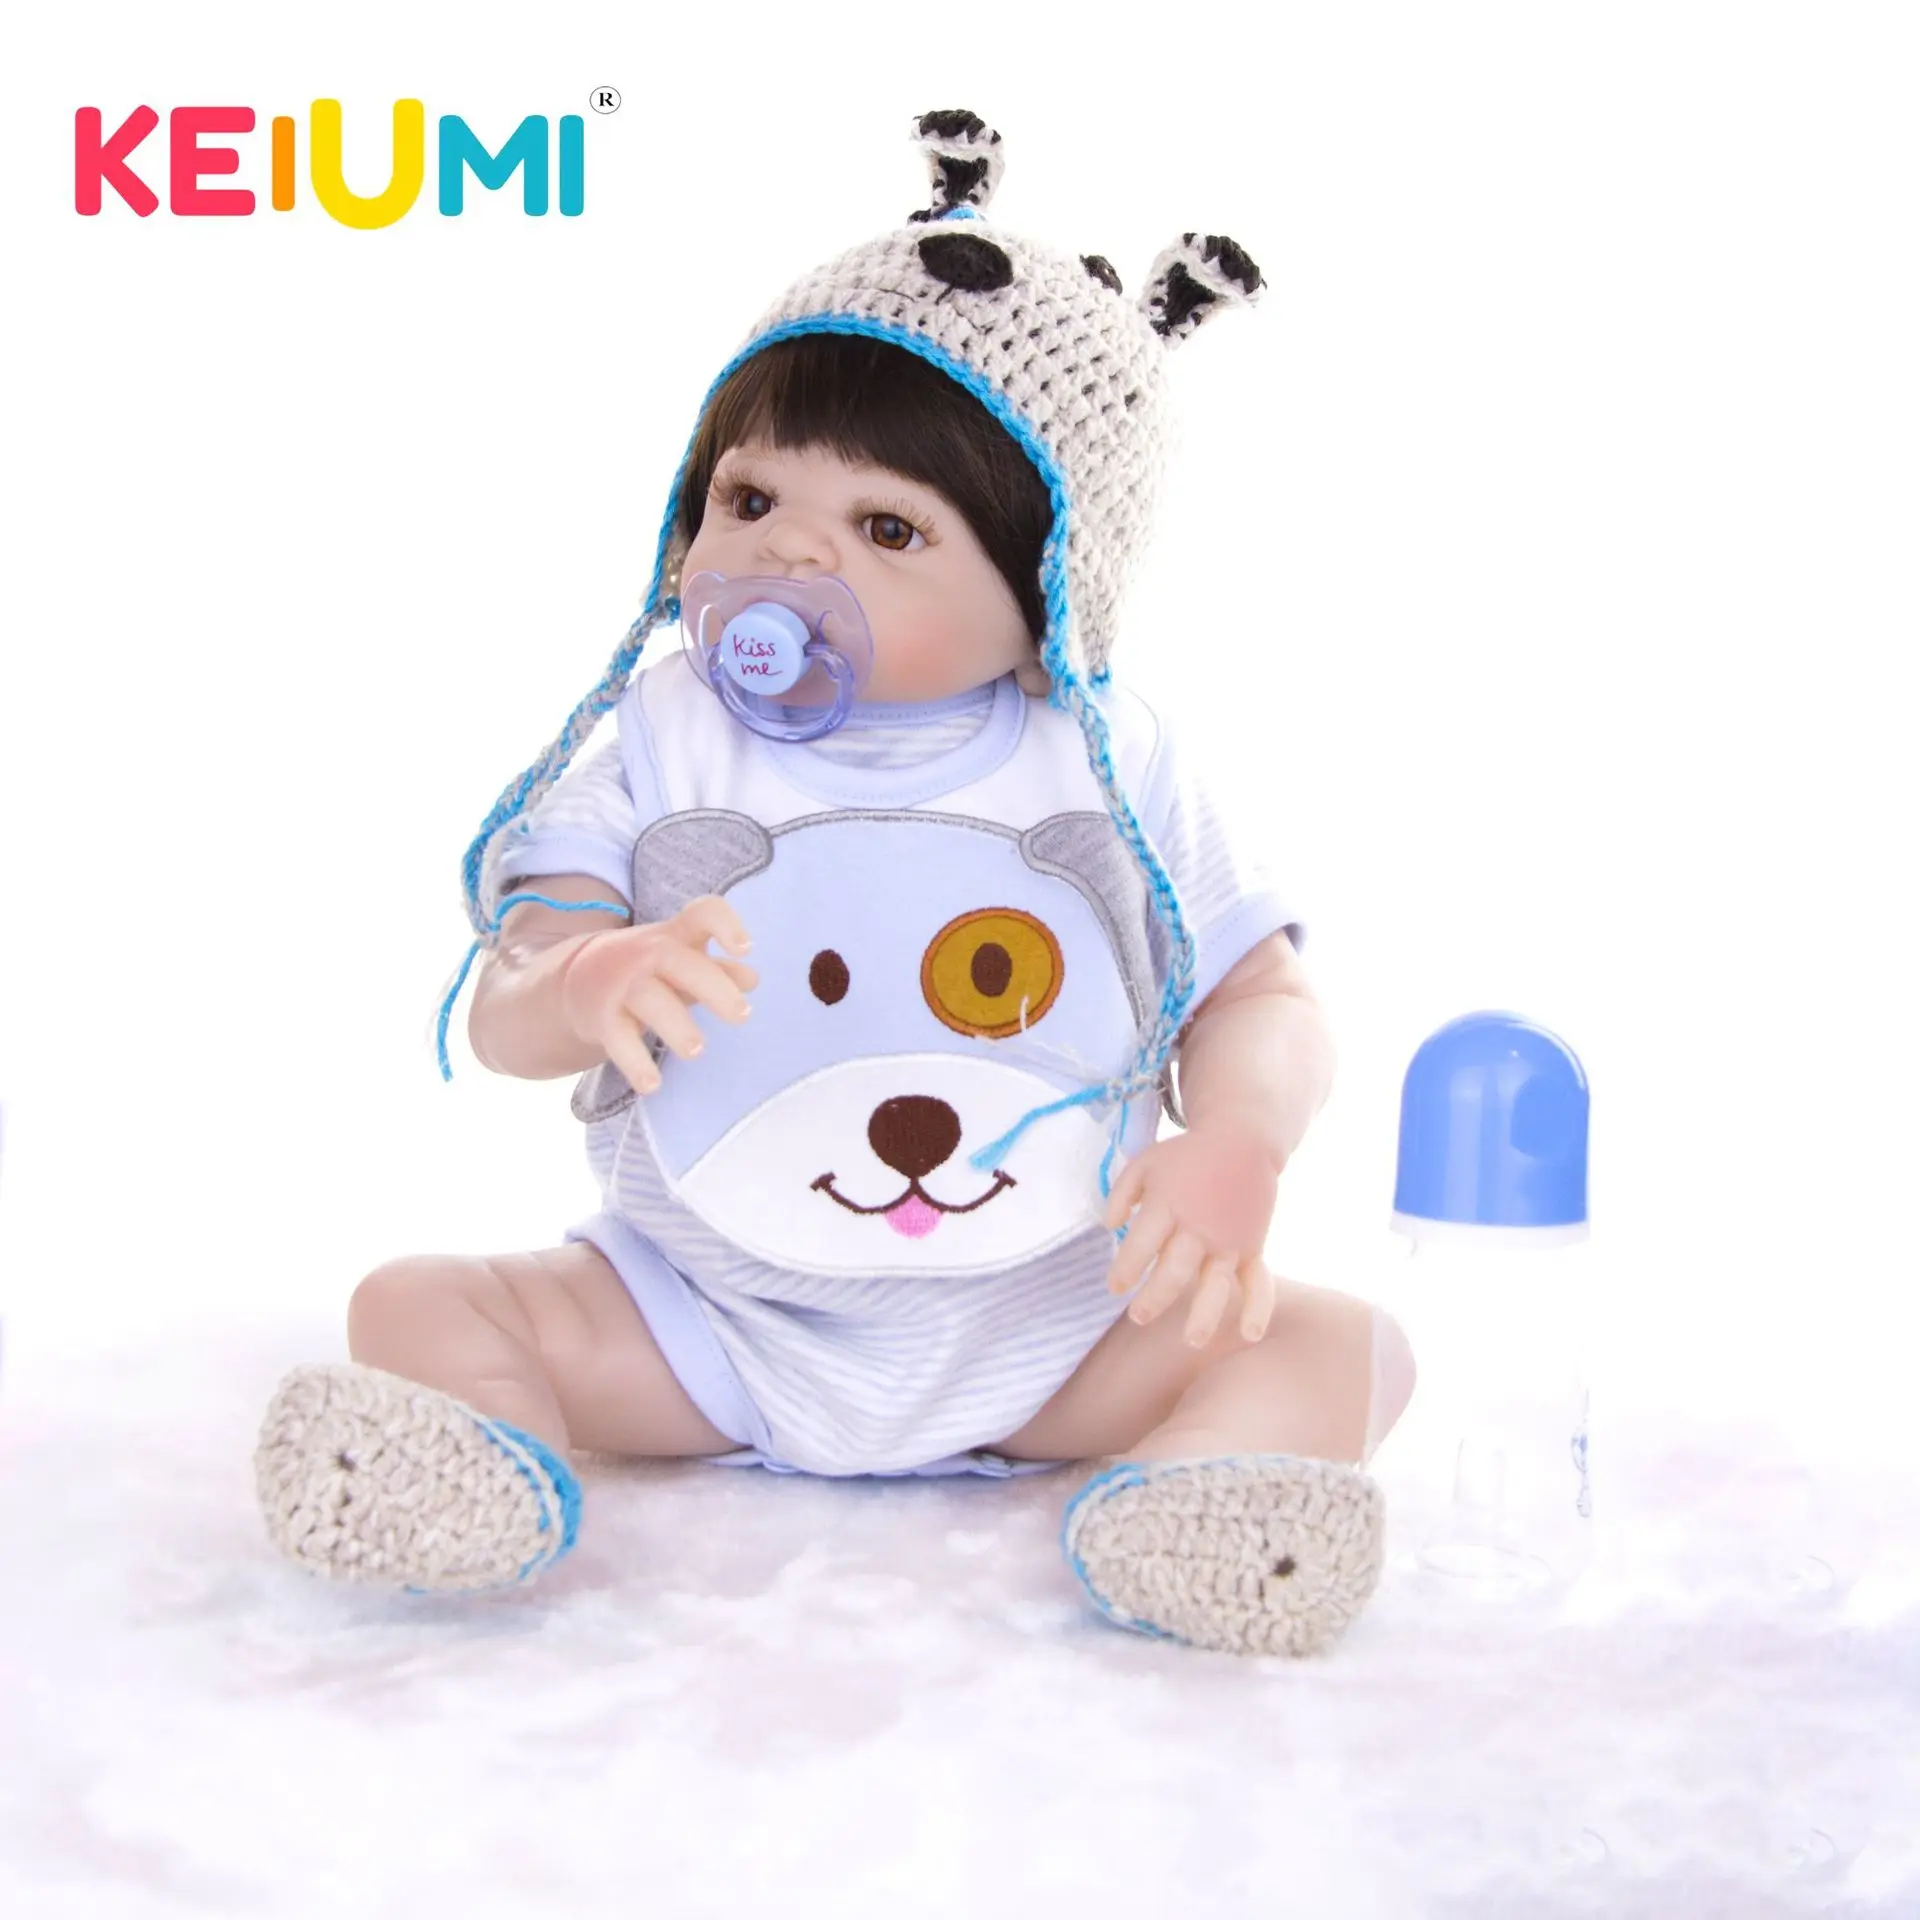  Keiumi AliExpress Hot Selling 19-Inch Reborn Baby Doll Model Infant Reborn Baby CHILDREN'S Toy